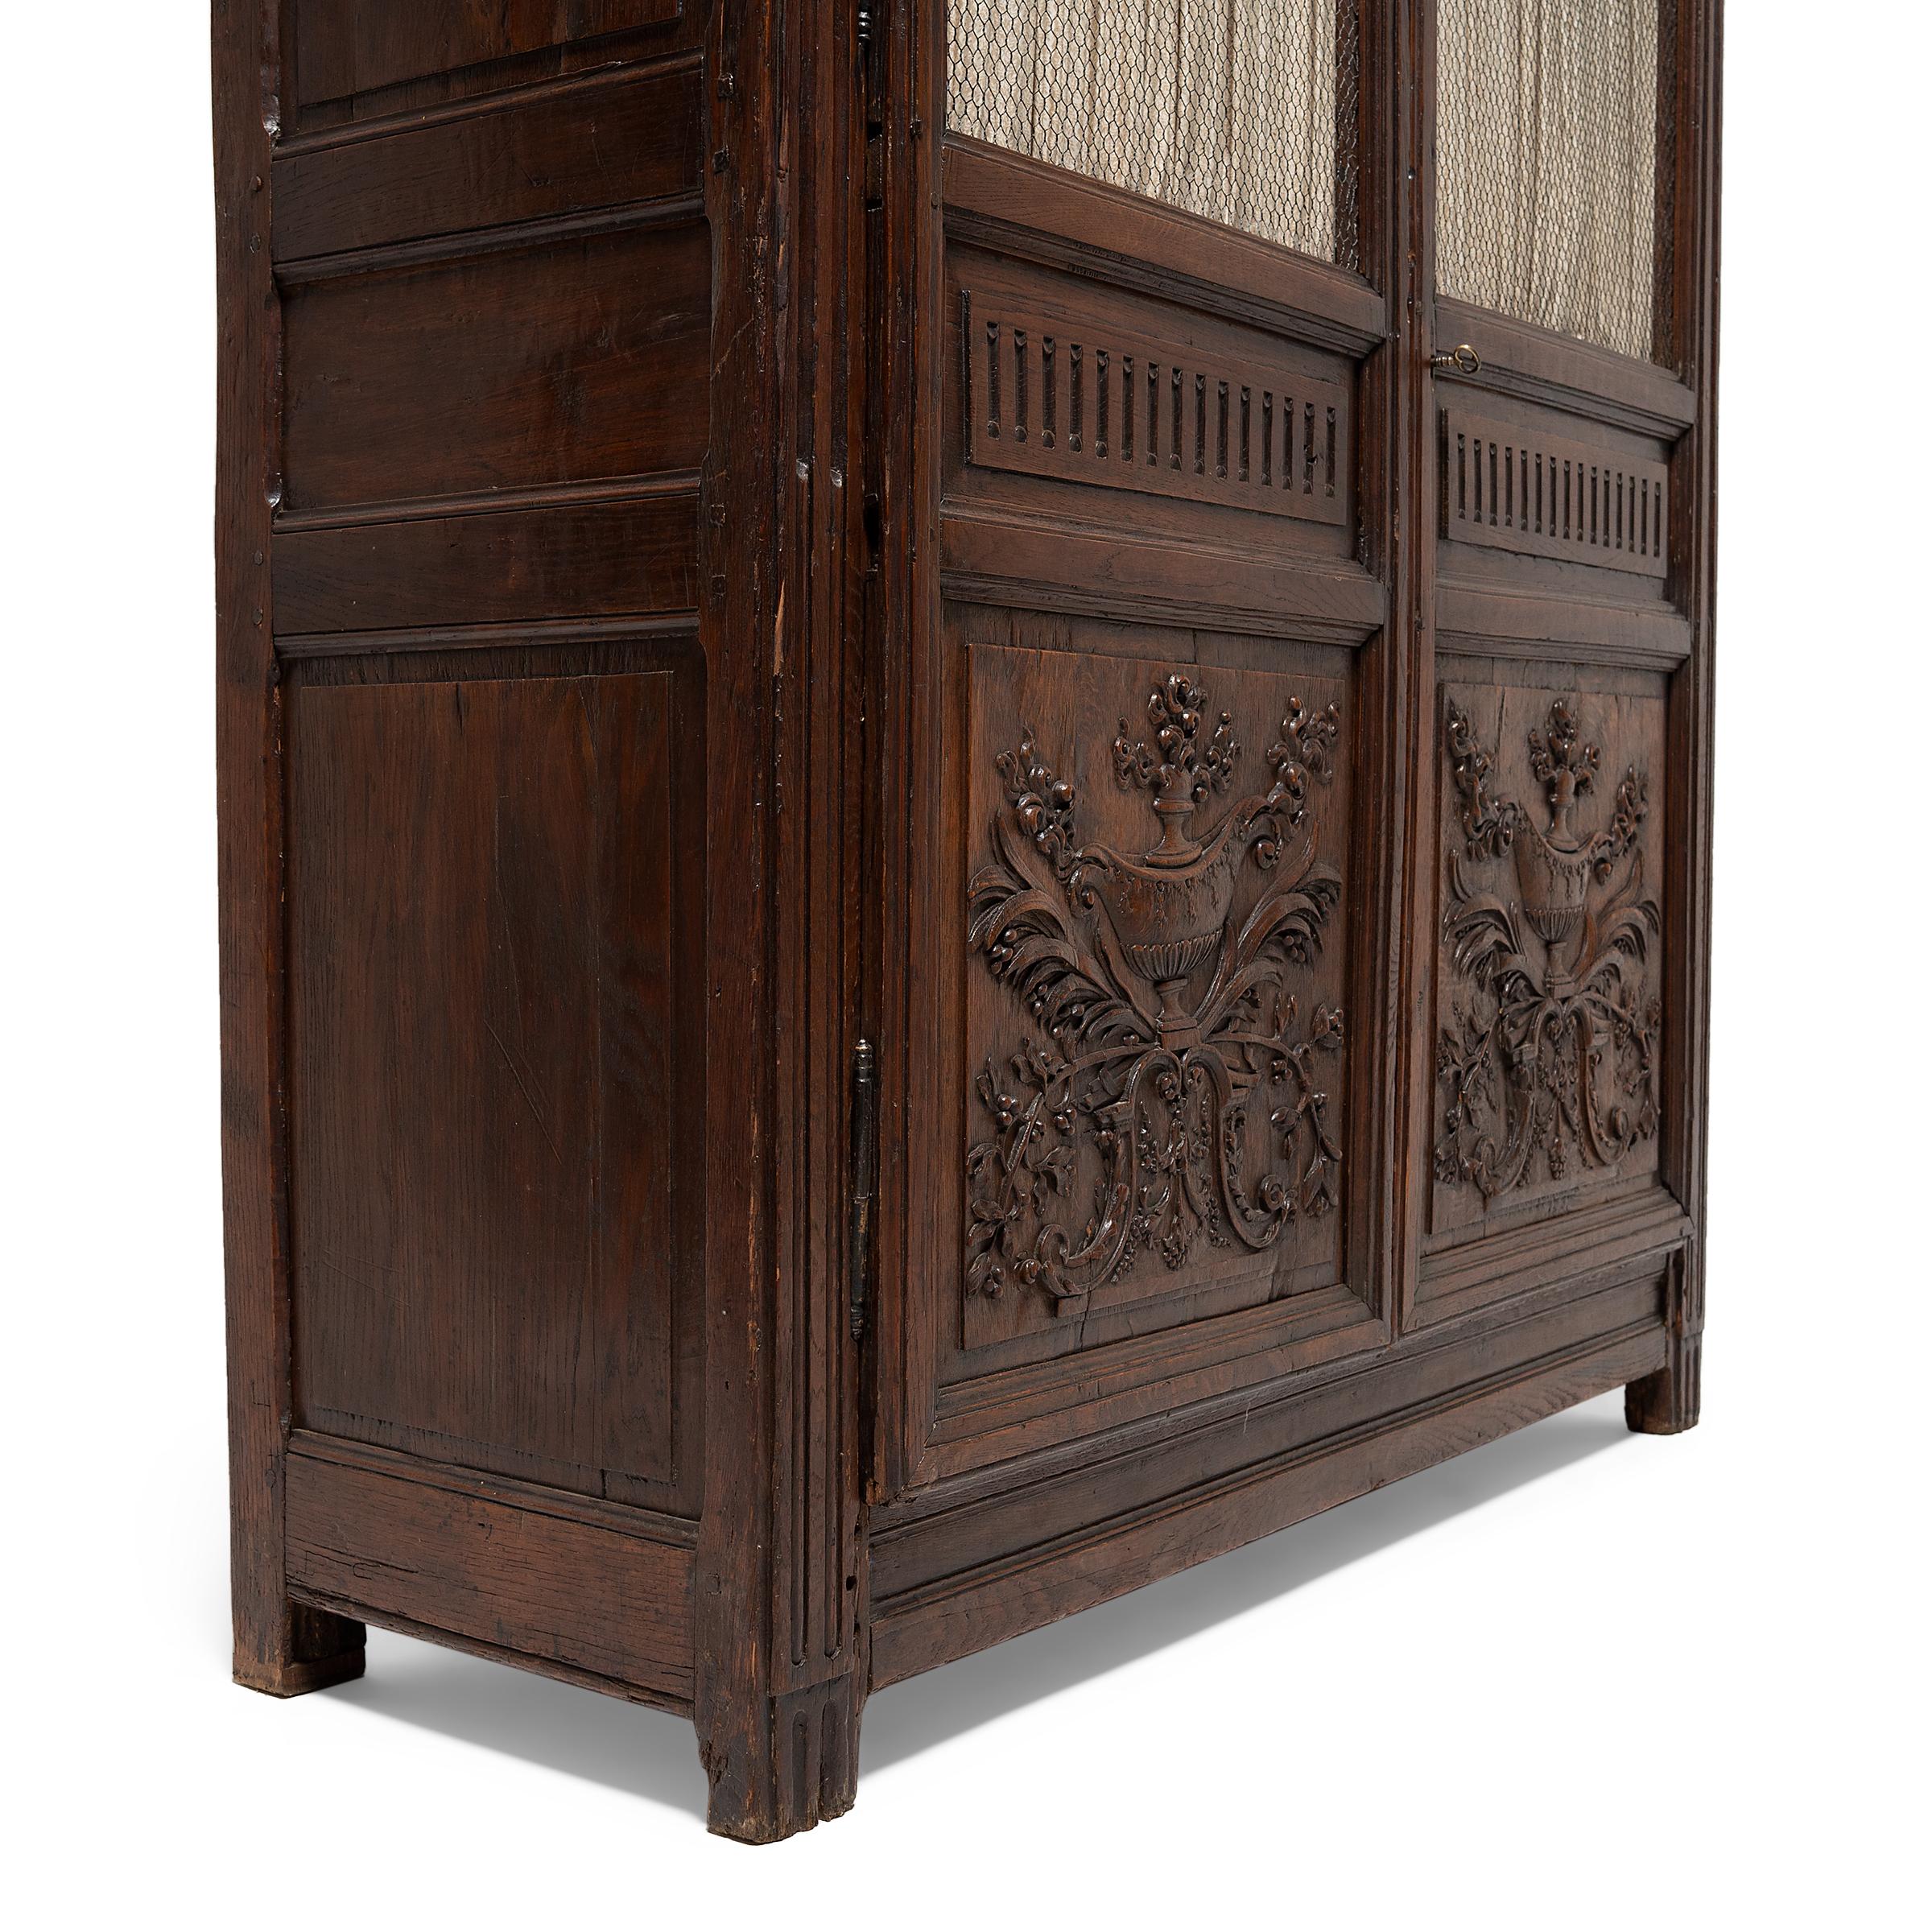 Grand Renaissance Revival Armoire with Wire Screens, circa 1800 For Sale 3